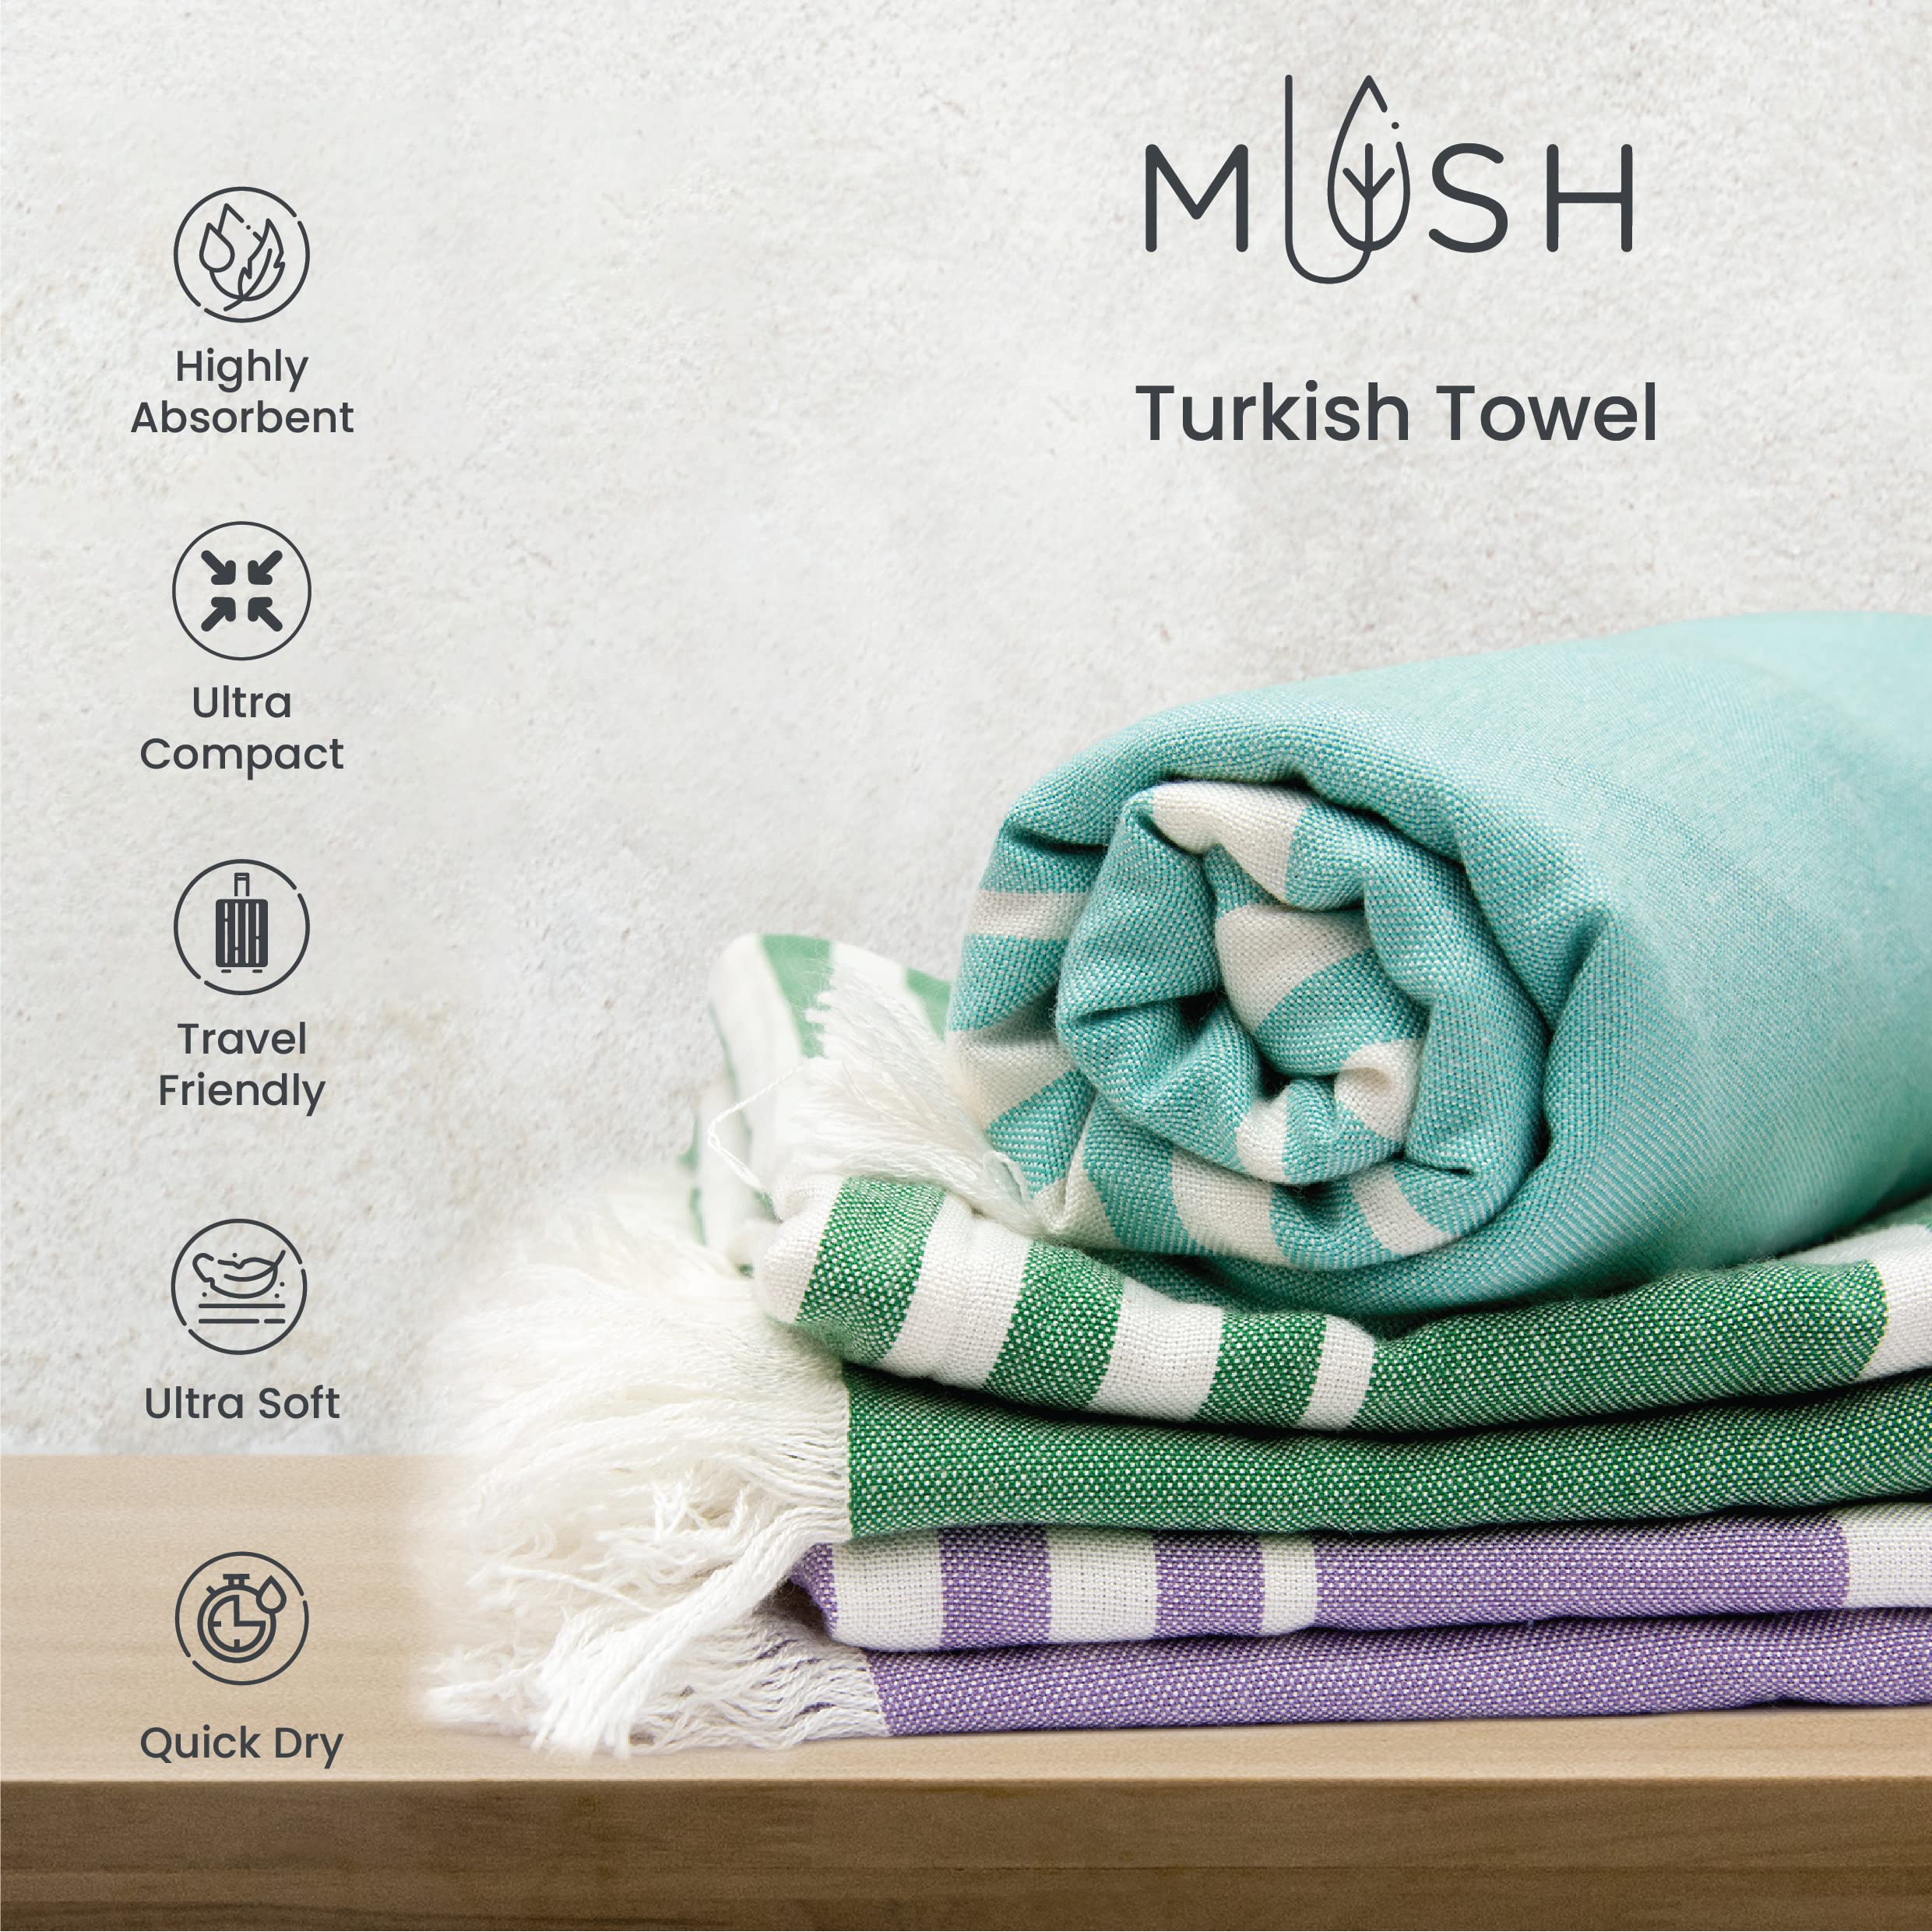 Mush 100% Bamboo Light Weight & Ultra-Compact Turkish Towel Super Soft, Absorbent, Quick Dry, Anti-Odor Bamboo Towel for Bath, Travel, Gym, Swim and Workout (2, Beige - Lavender)